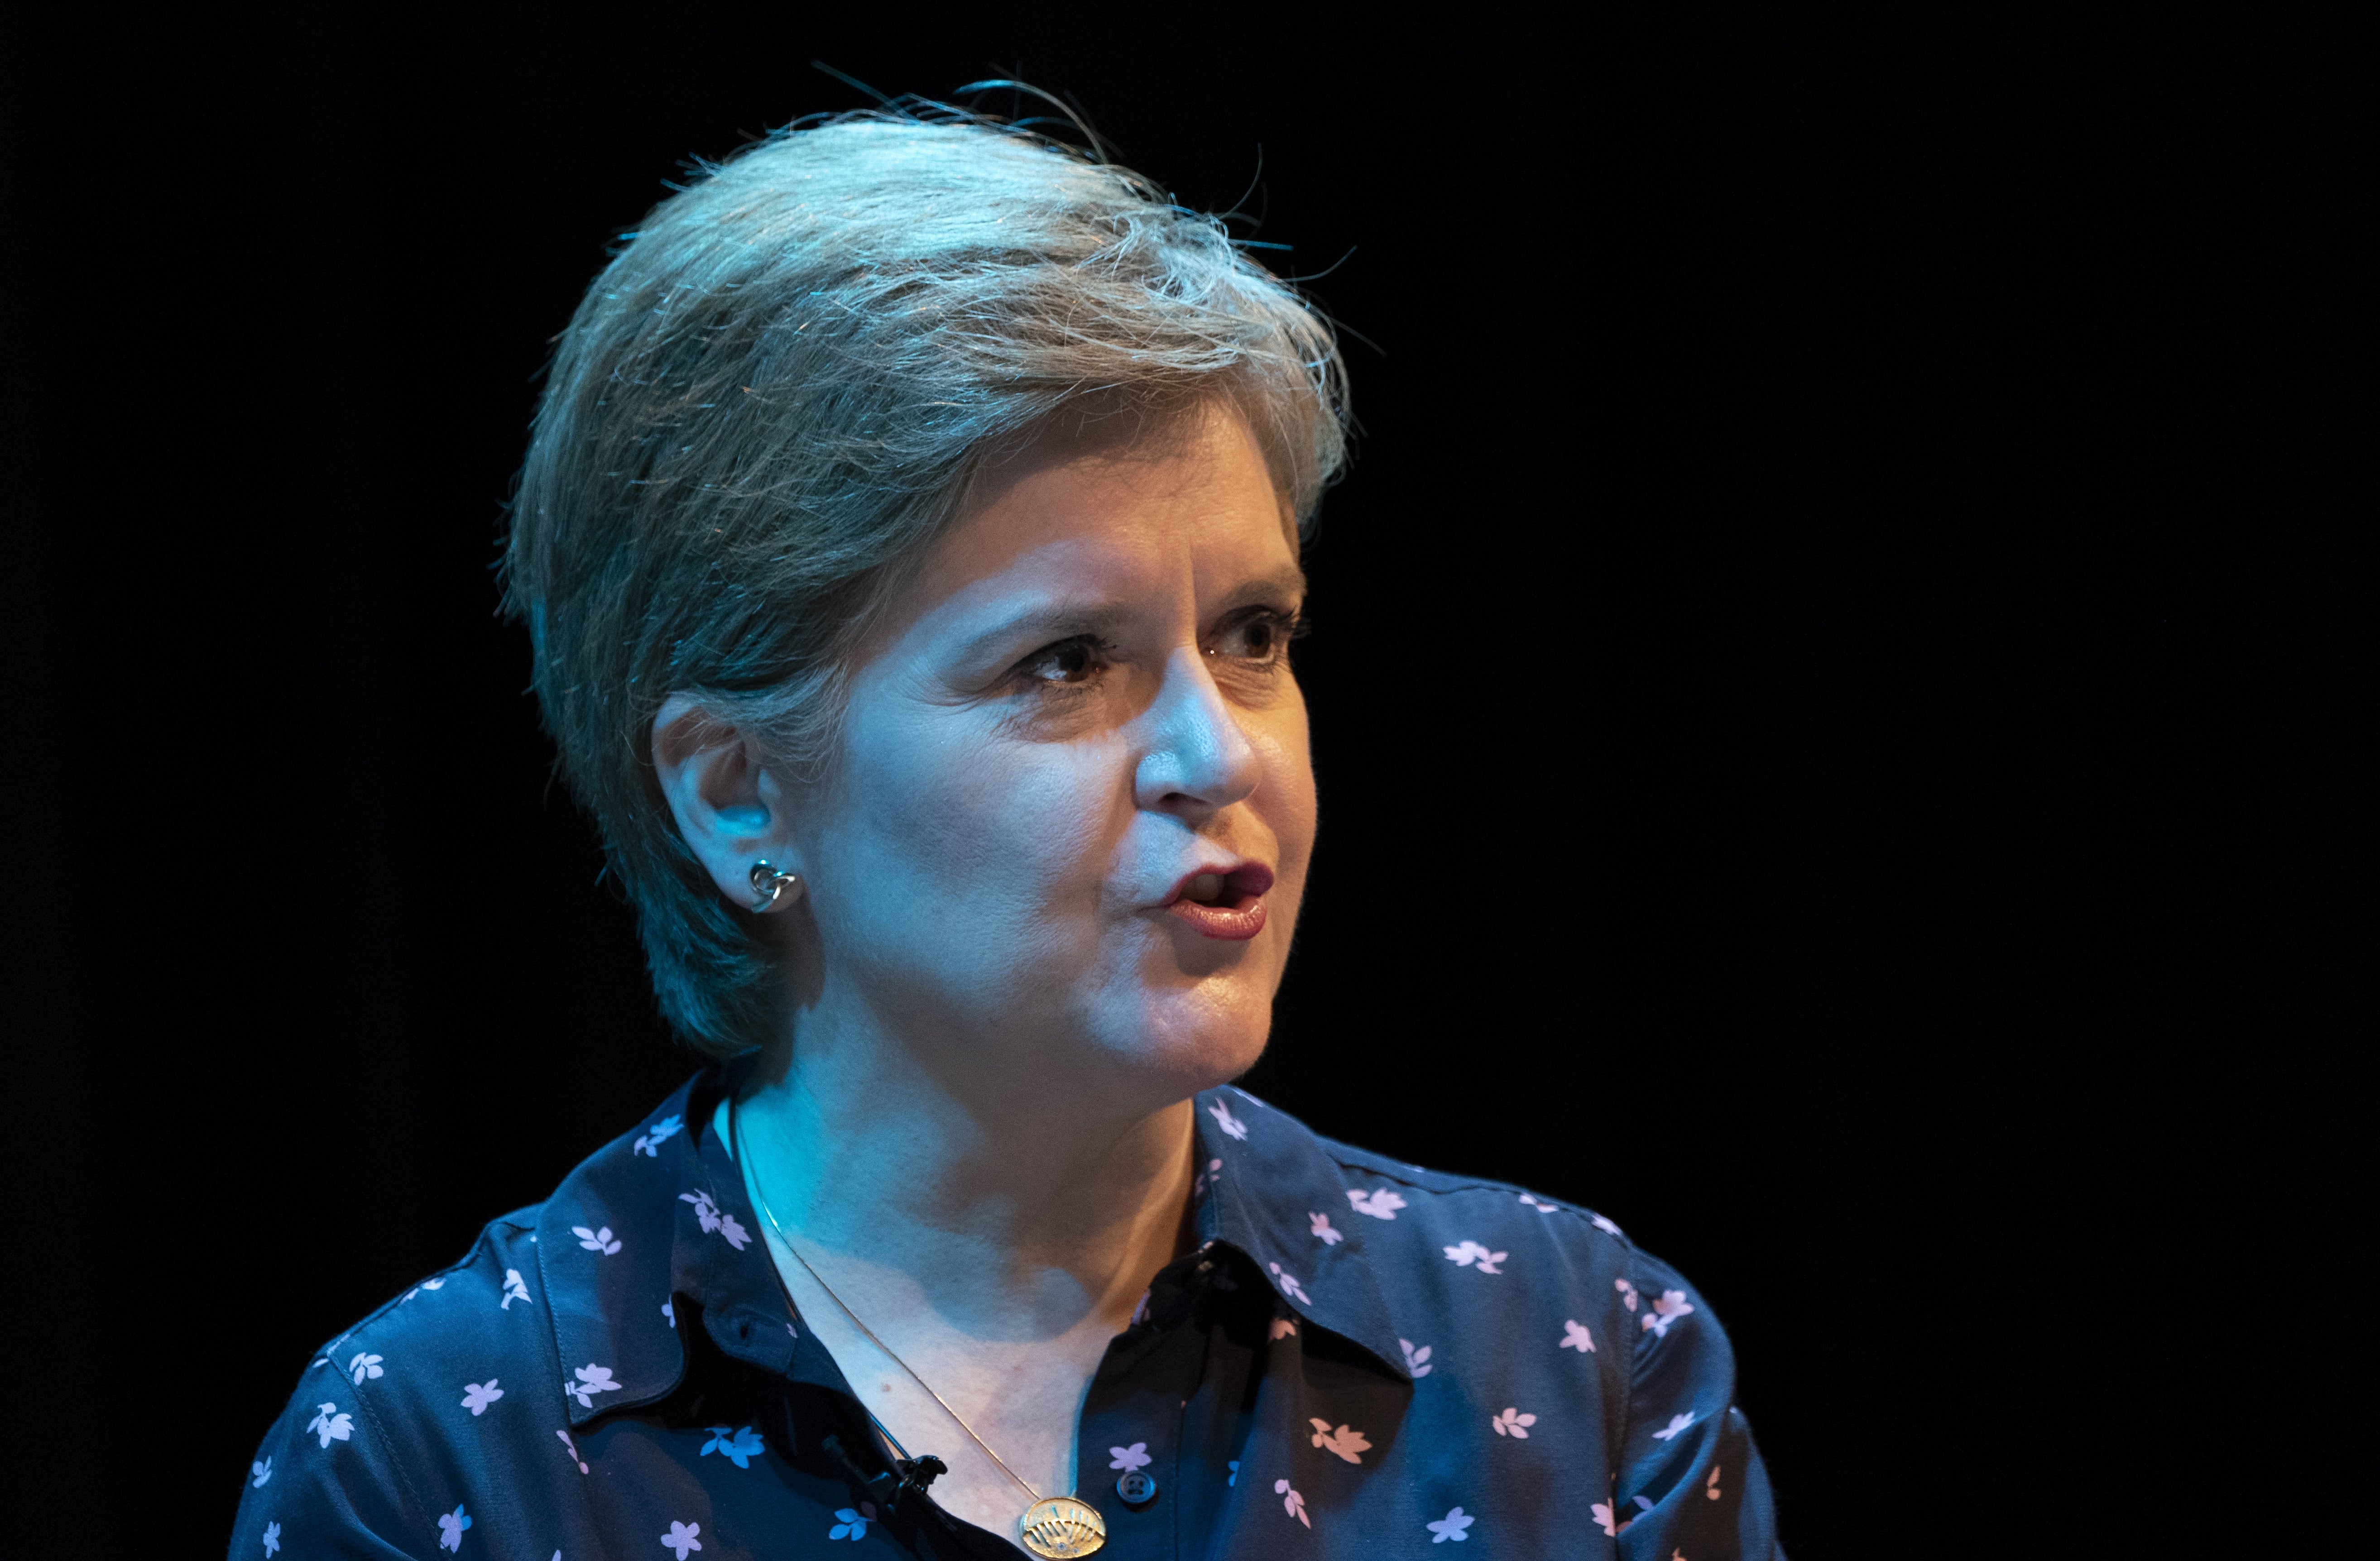 First Minister Nicola Sturgeon has said her government will work to ‘safeguard the access of women to abortion services without harassment or intimidation’. (Jane Barlow/PA)